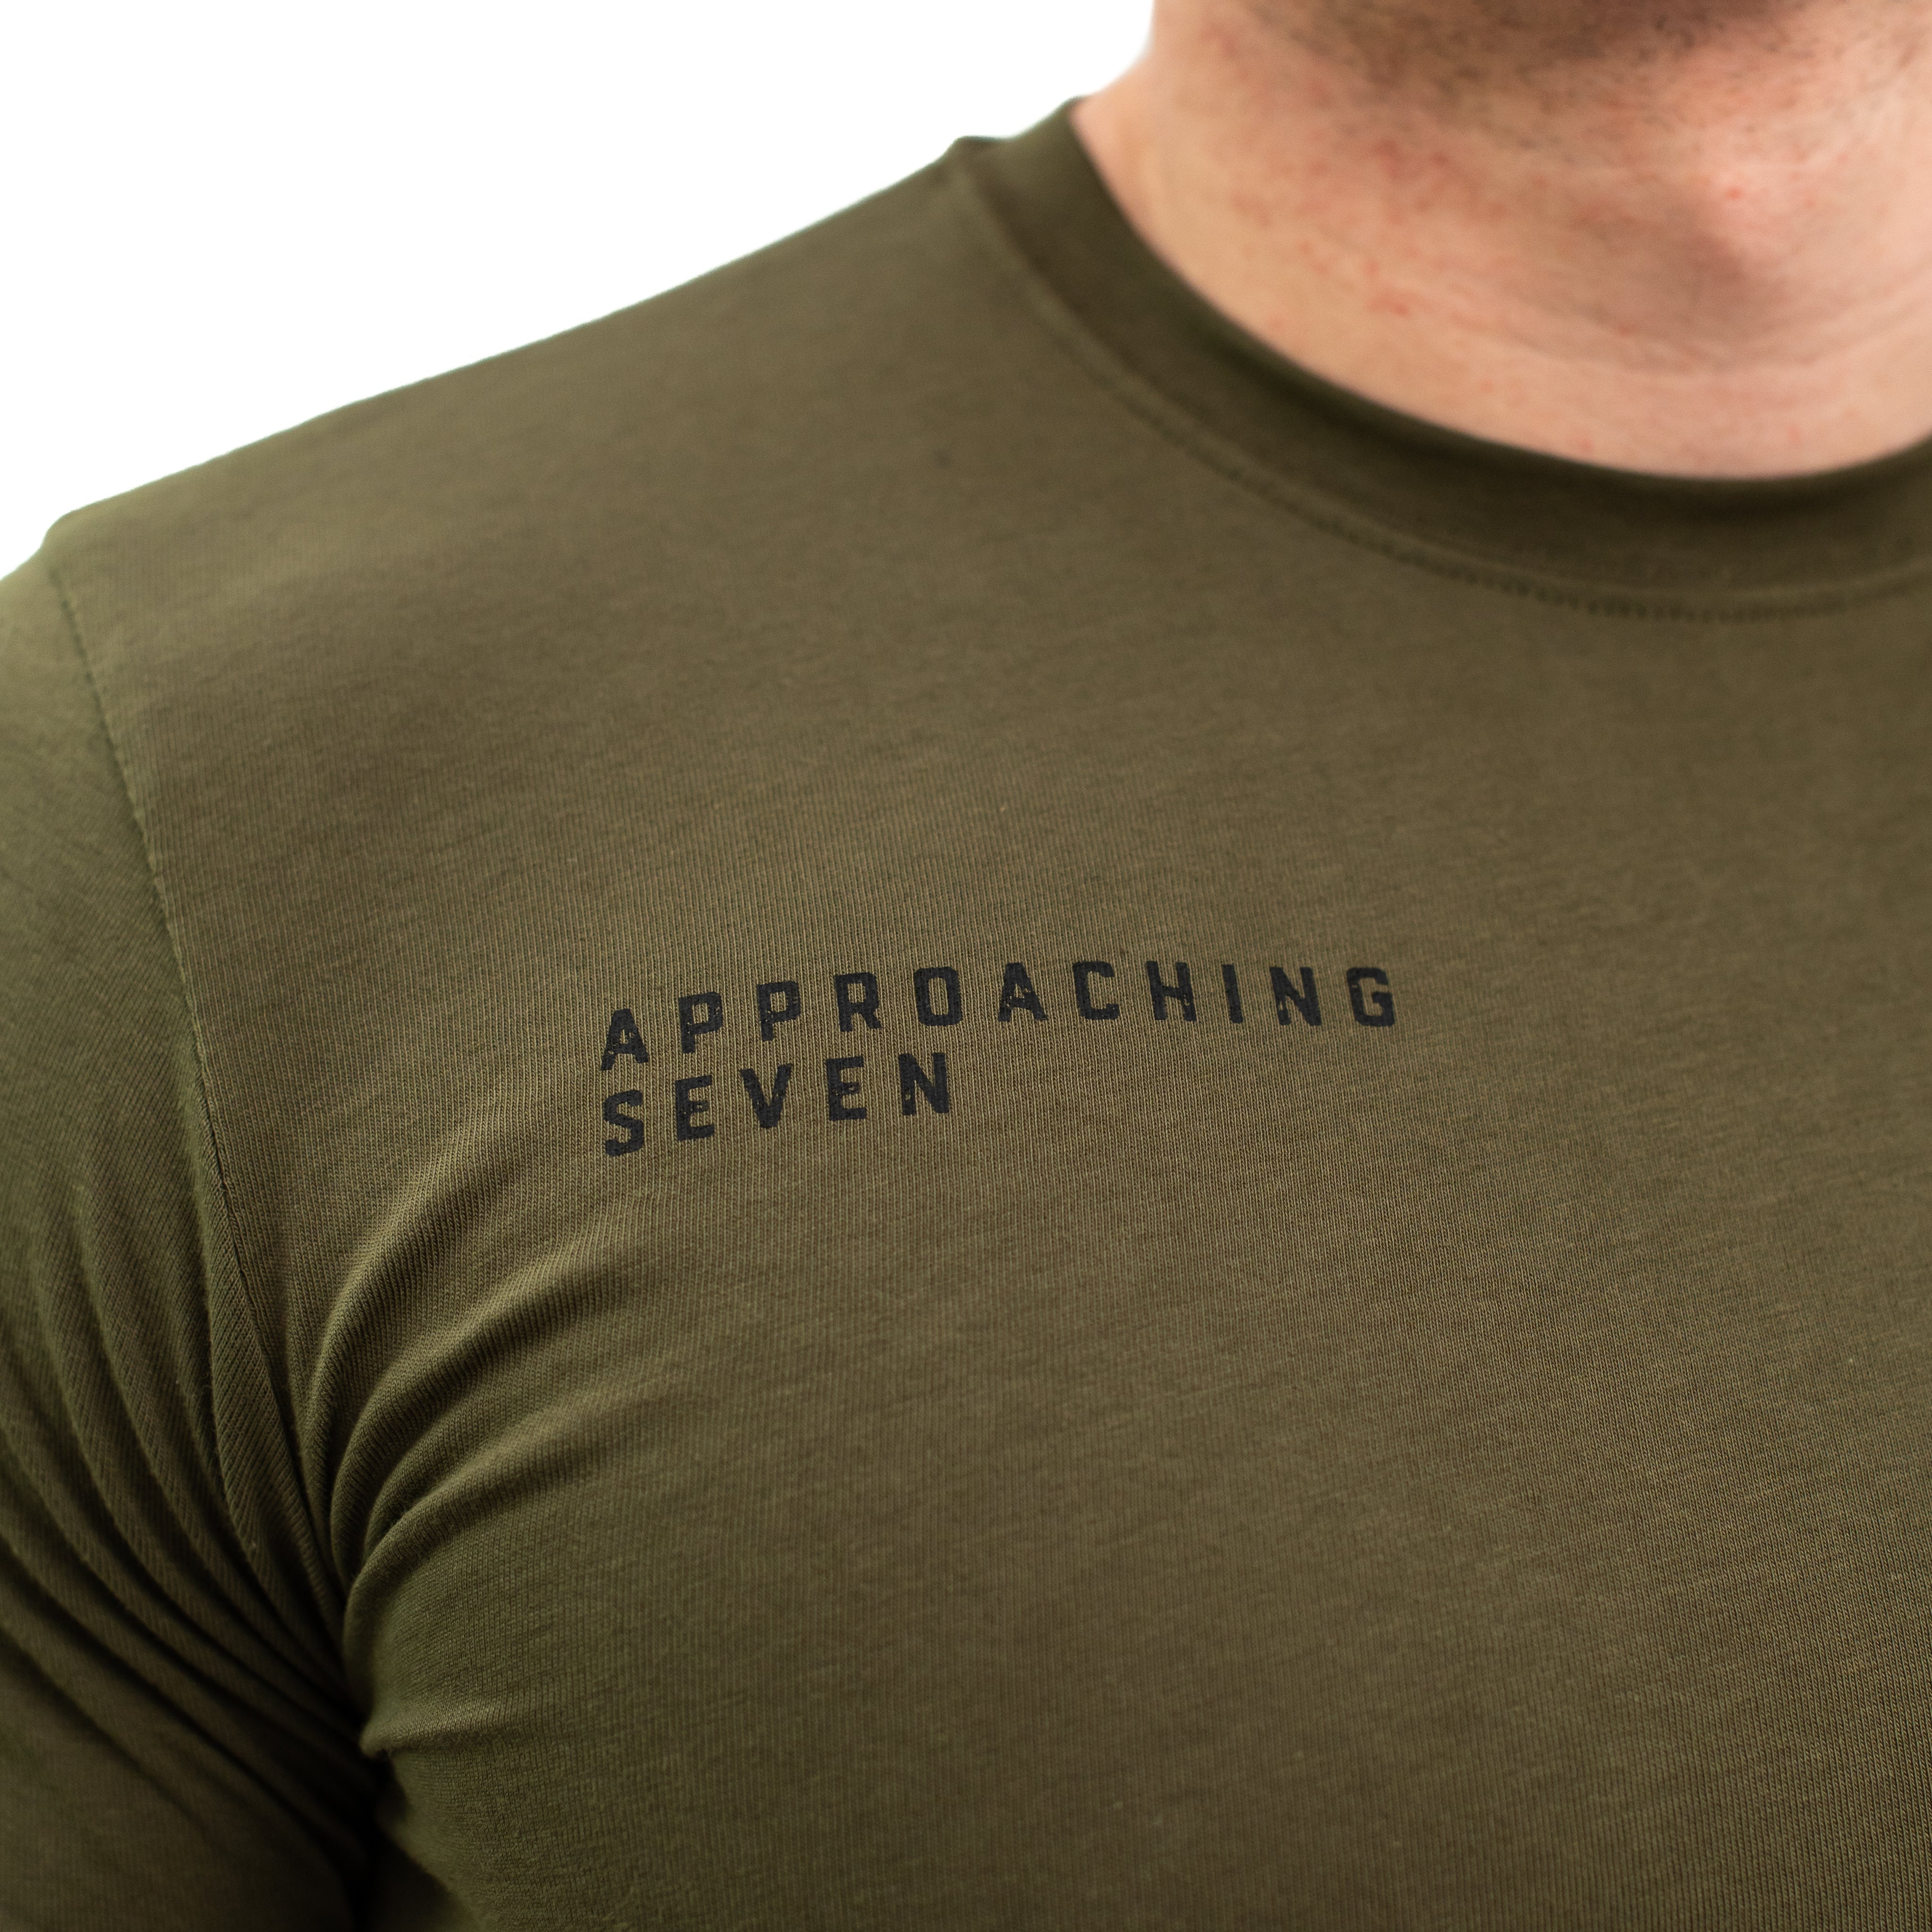 Seven Bar Grip T-shirt, great as a squat shirt. Purchase Seven Bar Grip tshirt UK from A7 UK. Purchase Seven Bar Grip Shirt Europe from A7 UK. No more chalk and no more sliding. Best Bar Grip Tshirts, shipping to UK and Europe from A7 UK. Seven is our classic black on black shirt design! The best Powerlifting apparel for all your workouts. Available in UK and Europe including France, Italy, Germany, Sweden and Poland